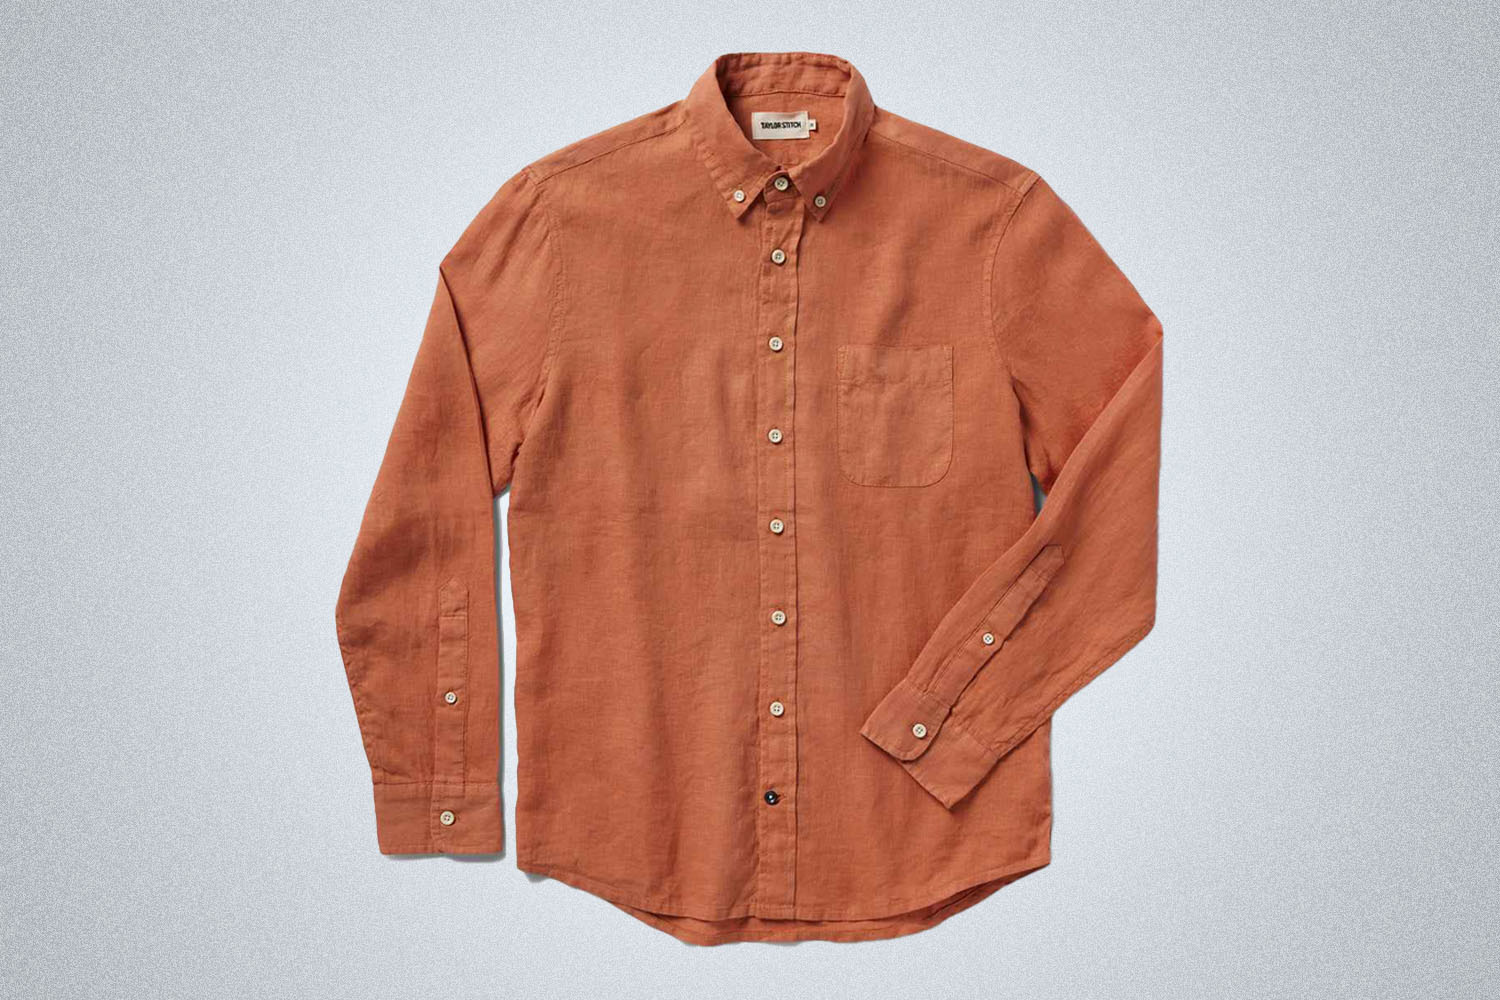 a apricot orange long sleeve linen button up shirt from Taylor Stitch on a grey background